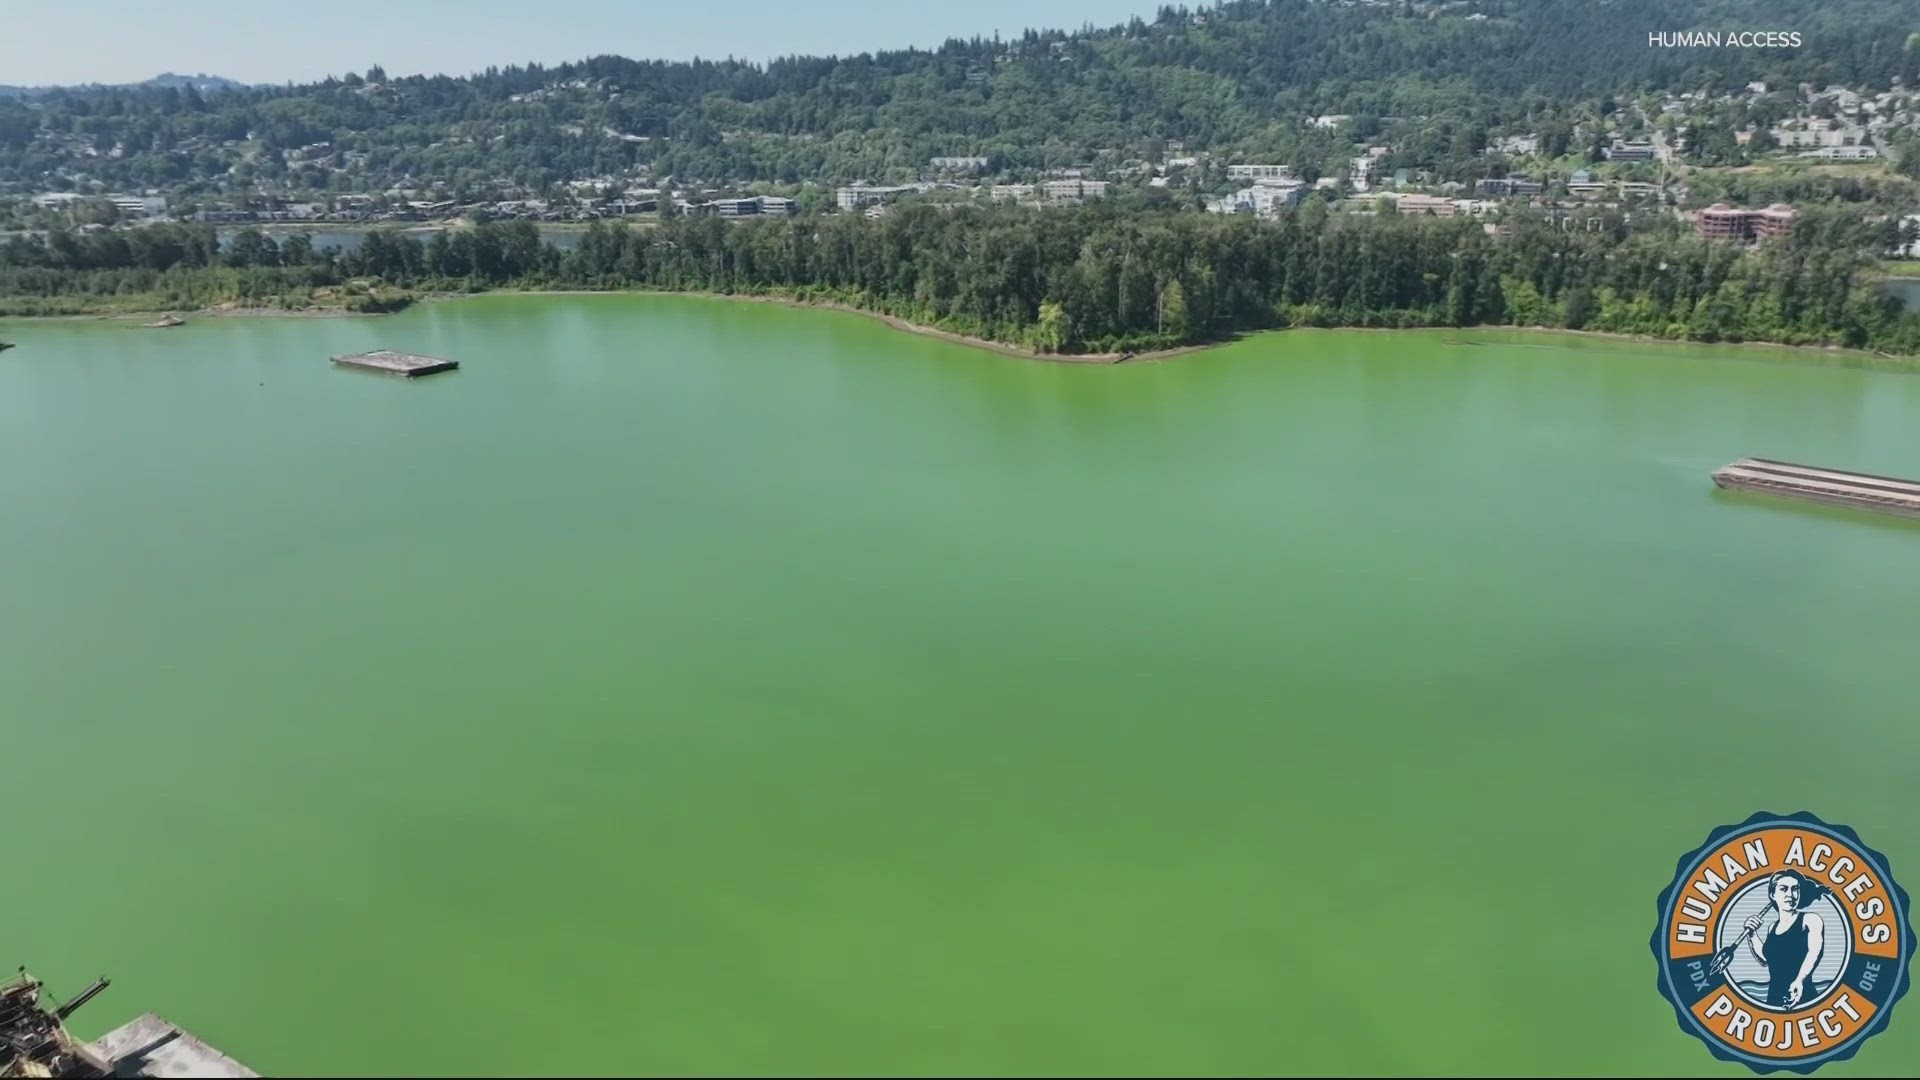 The Oregon Health Authority says it's now safe to enter the water in the Willamette Cove area, but the advisory is still in place for the Ross Island Lagoon area.